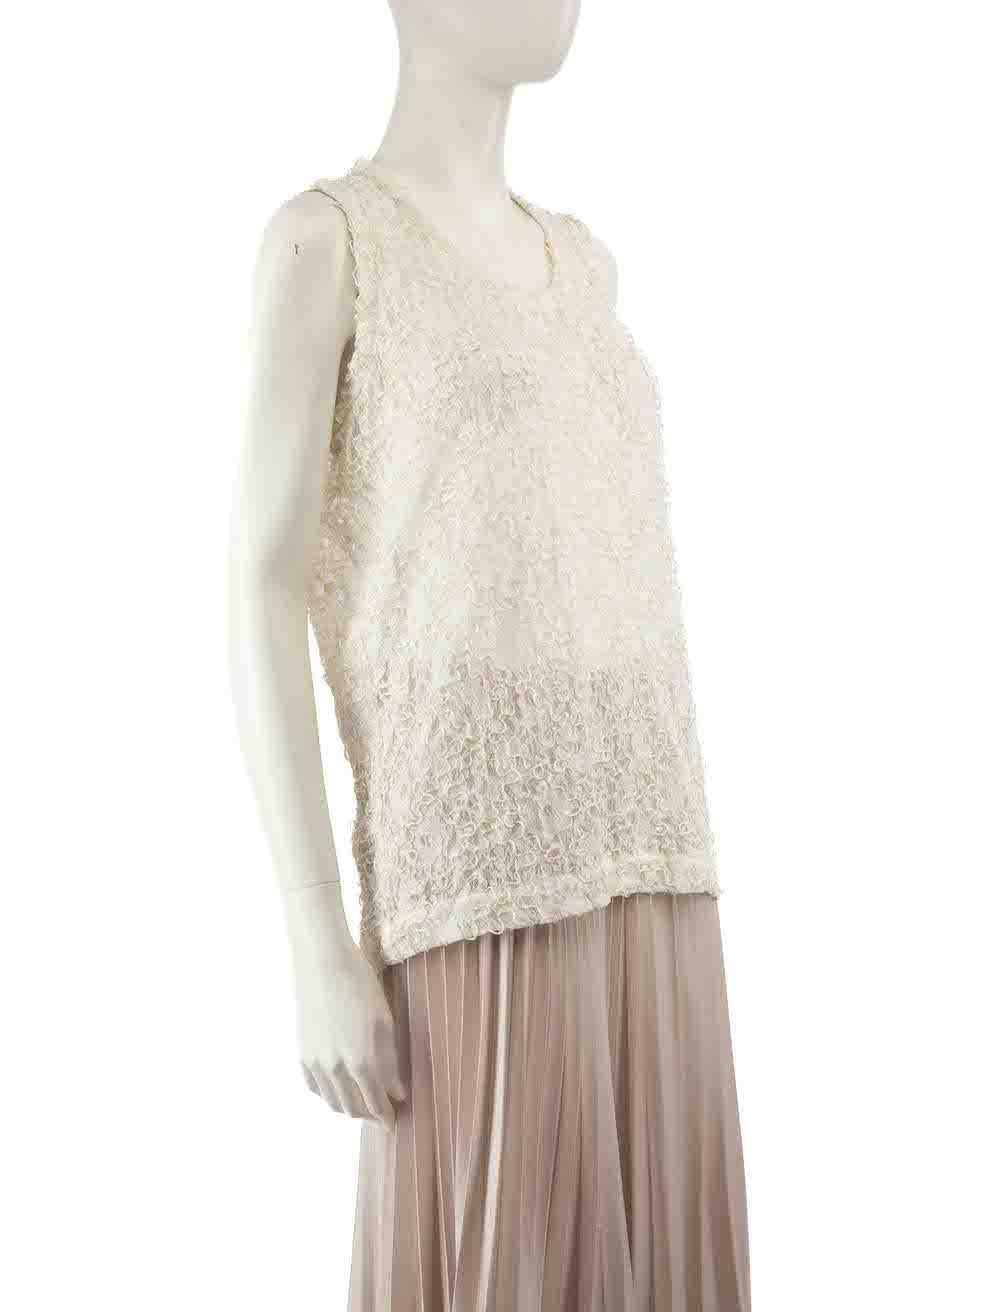 Condition
 
 CONDITION is Very good. Hardly any visible wear to top is evident on this used Comme des Gar√ßons designer resale item.
 
 Details
 
 
 
 Ecru
 
 Lace
 
 Top
 
 Sleeveless
 
 Metallic embroidery
 
 Round neck
 
 Sheer
 
 
 
 
 
 Size: